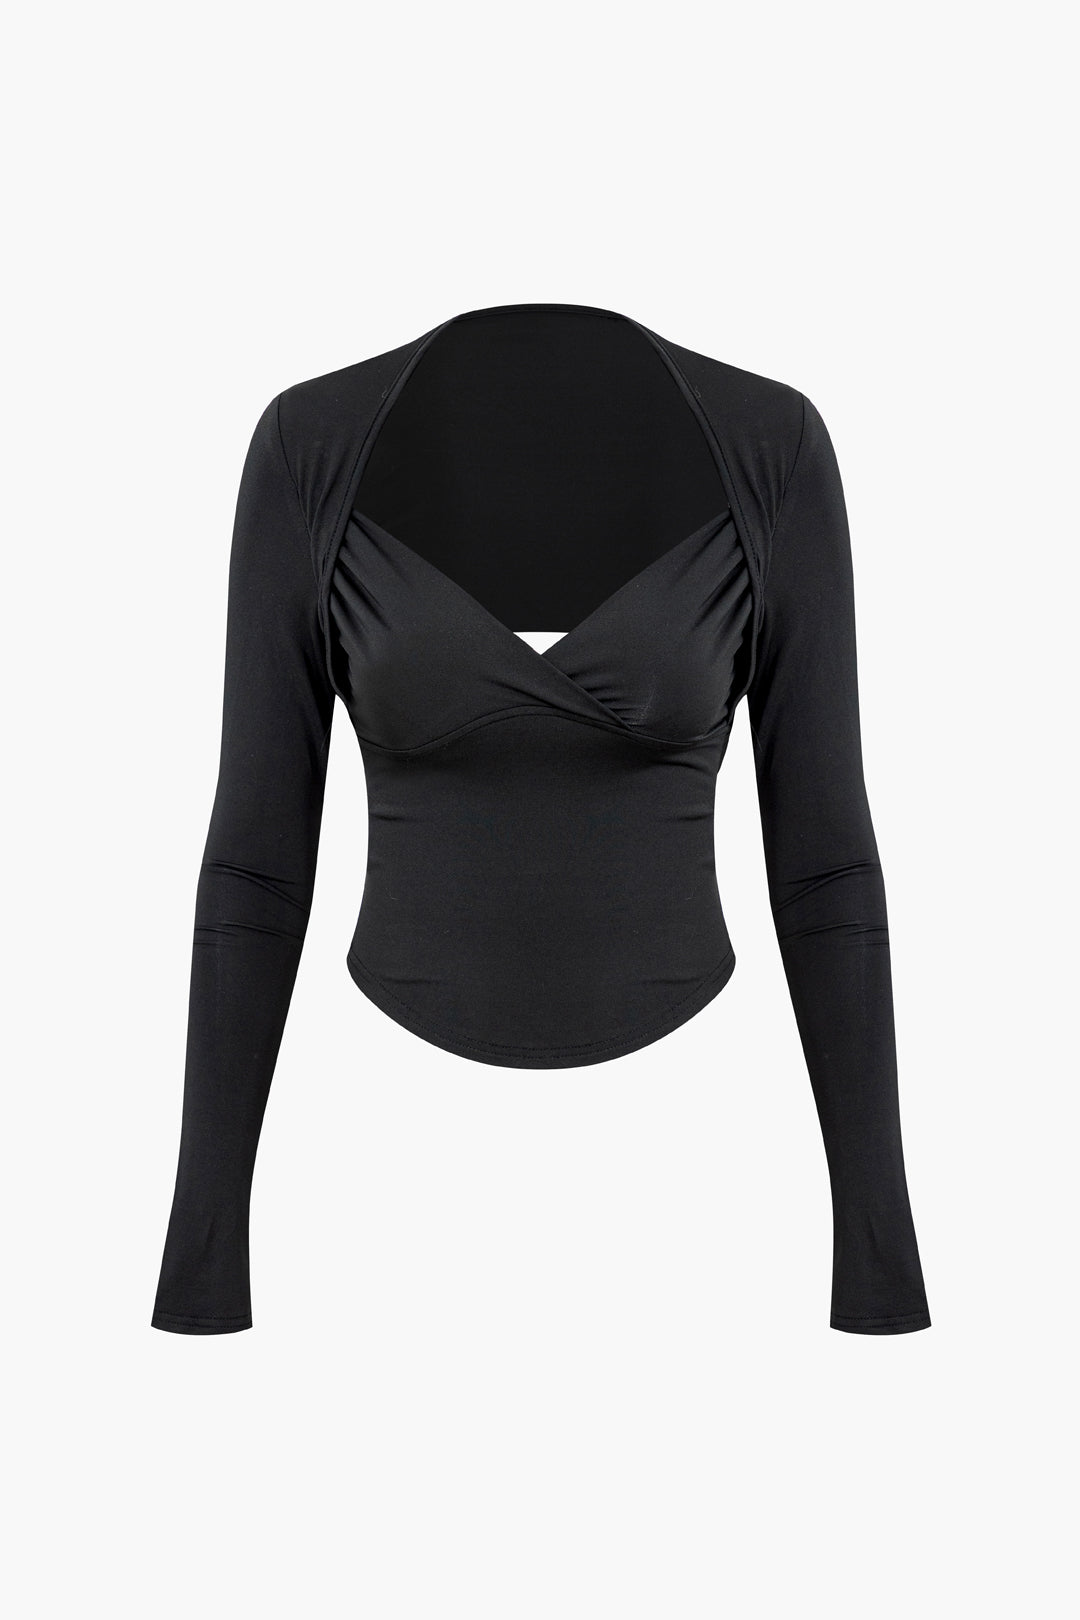 V-neck Cut Out Back Long Sleeve Crop Top